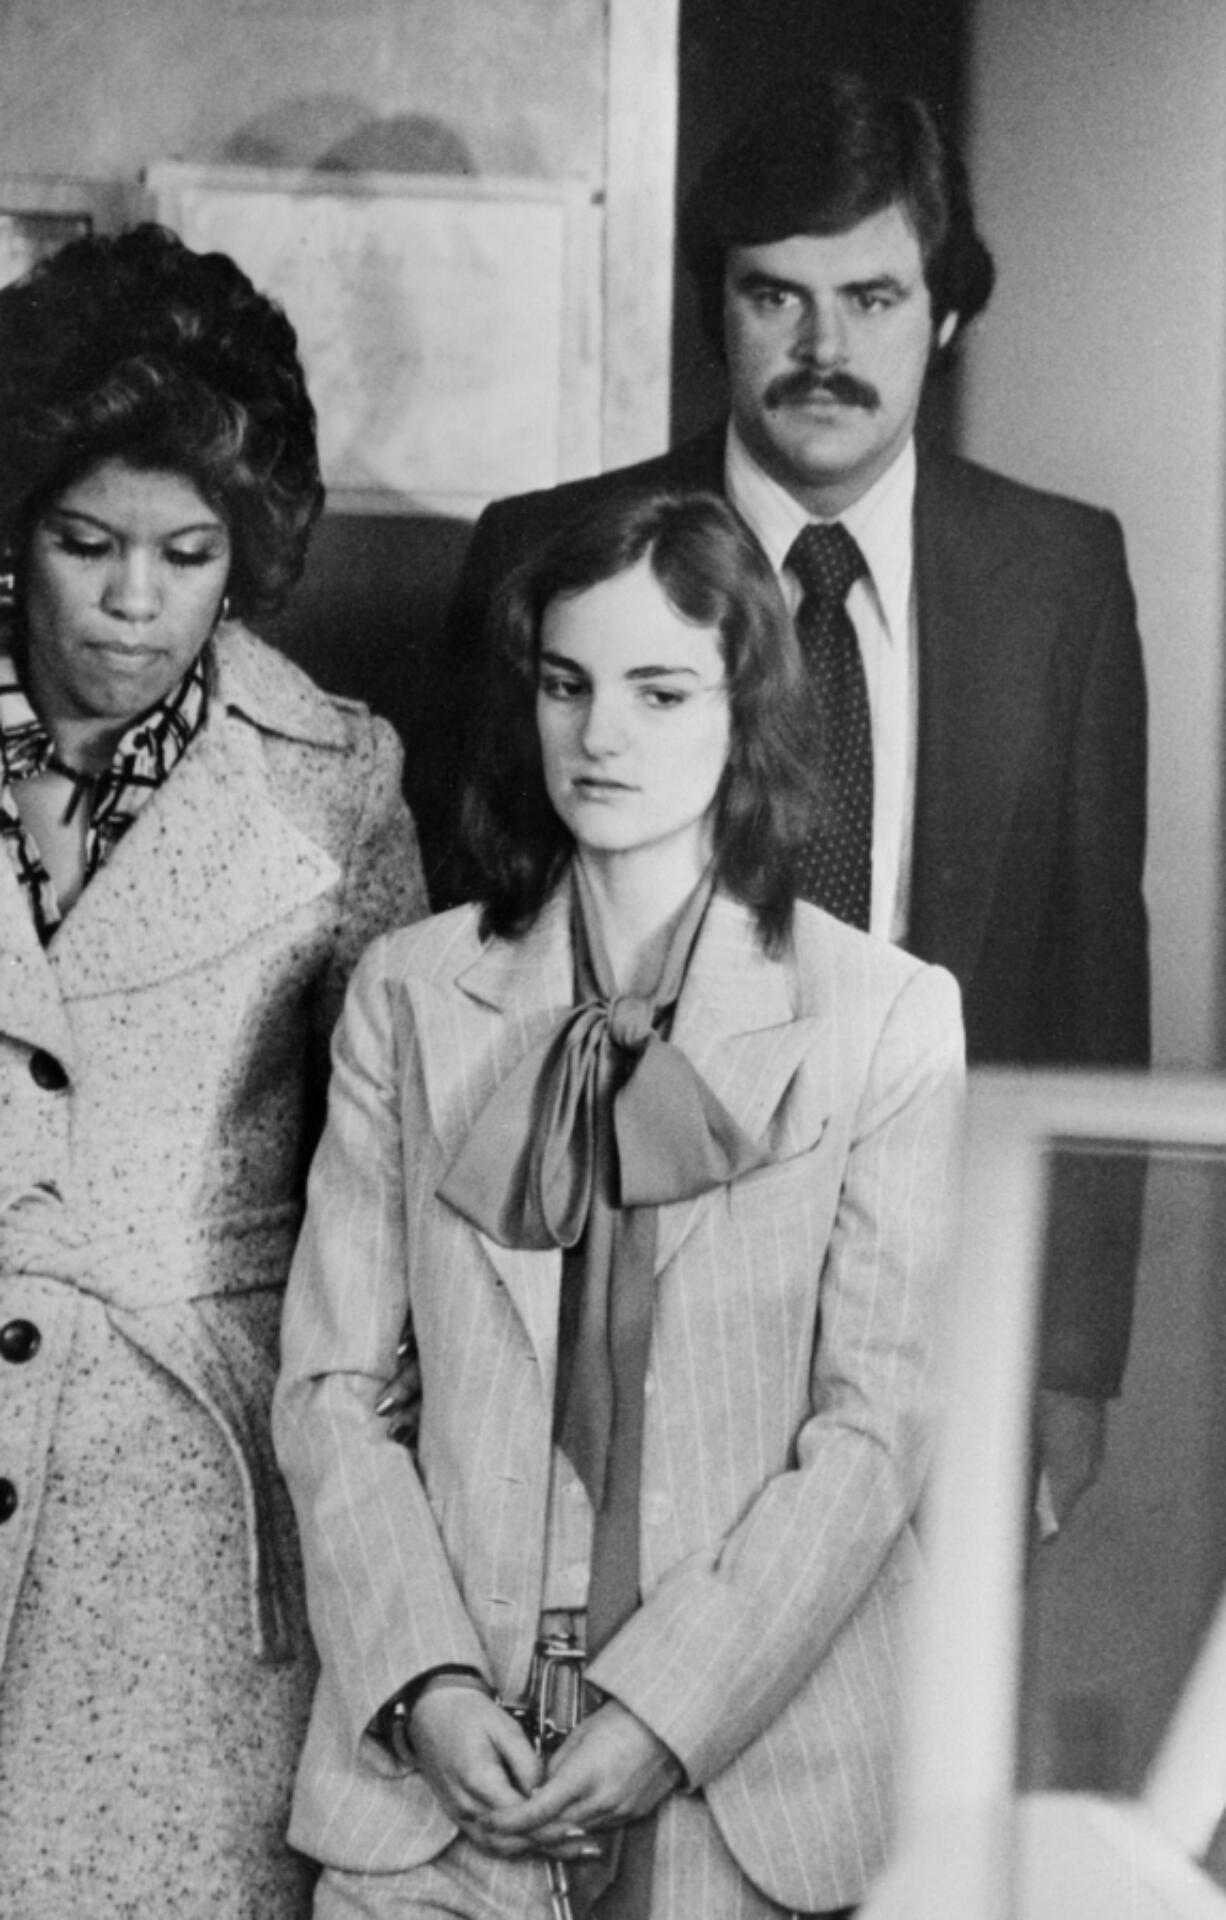 Patty Hearst makes her way to court on Feb. 17, 1976, during her trial on charge of bank robbery.